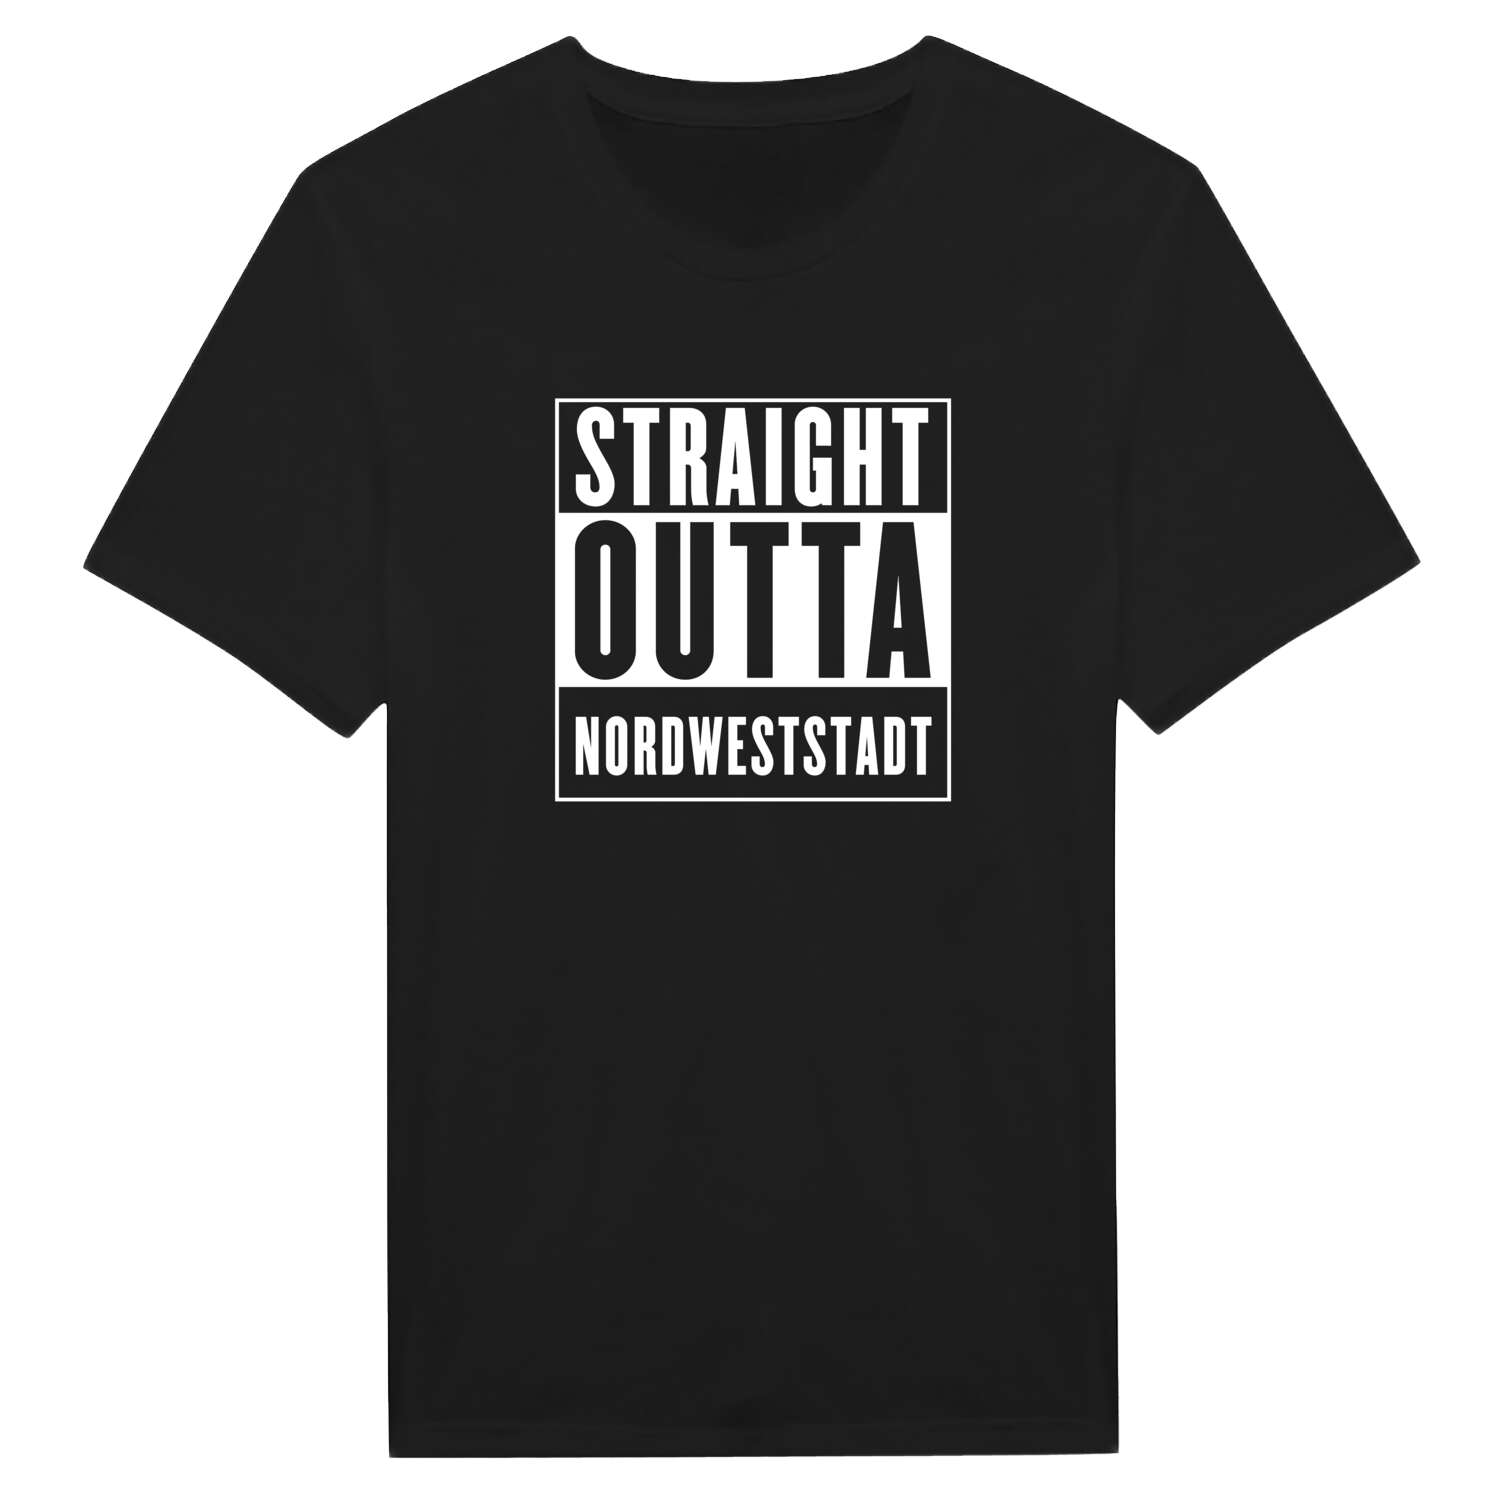 Nordweststadt T-Shirt »Straight Outta«